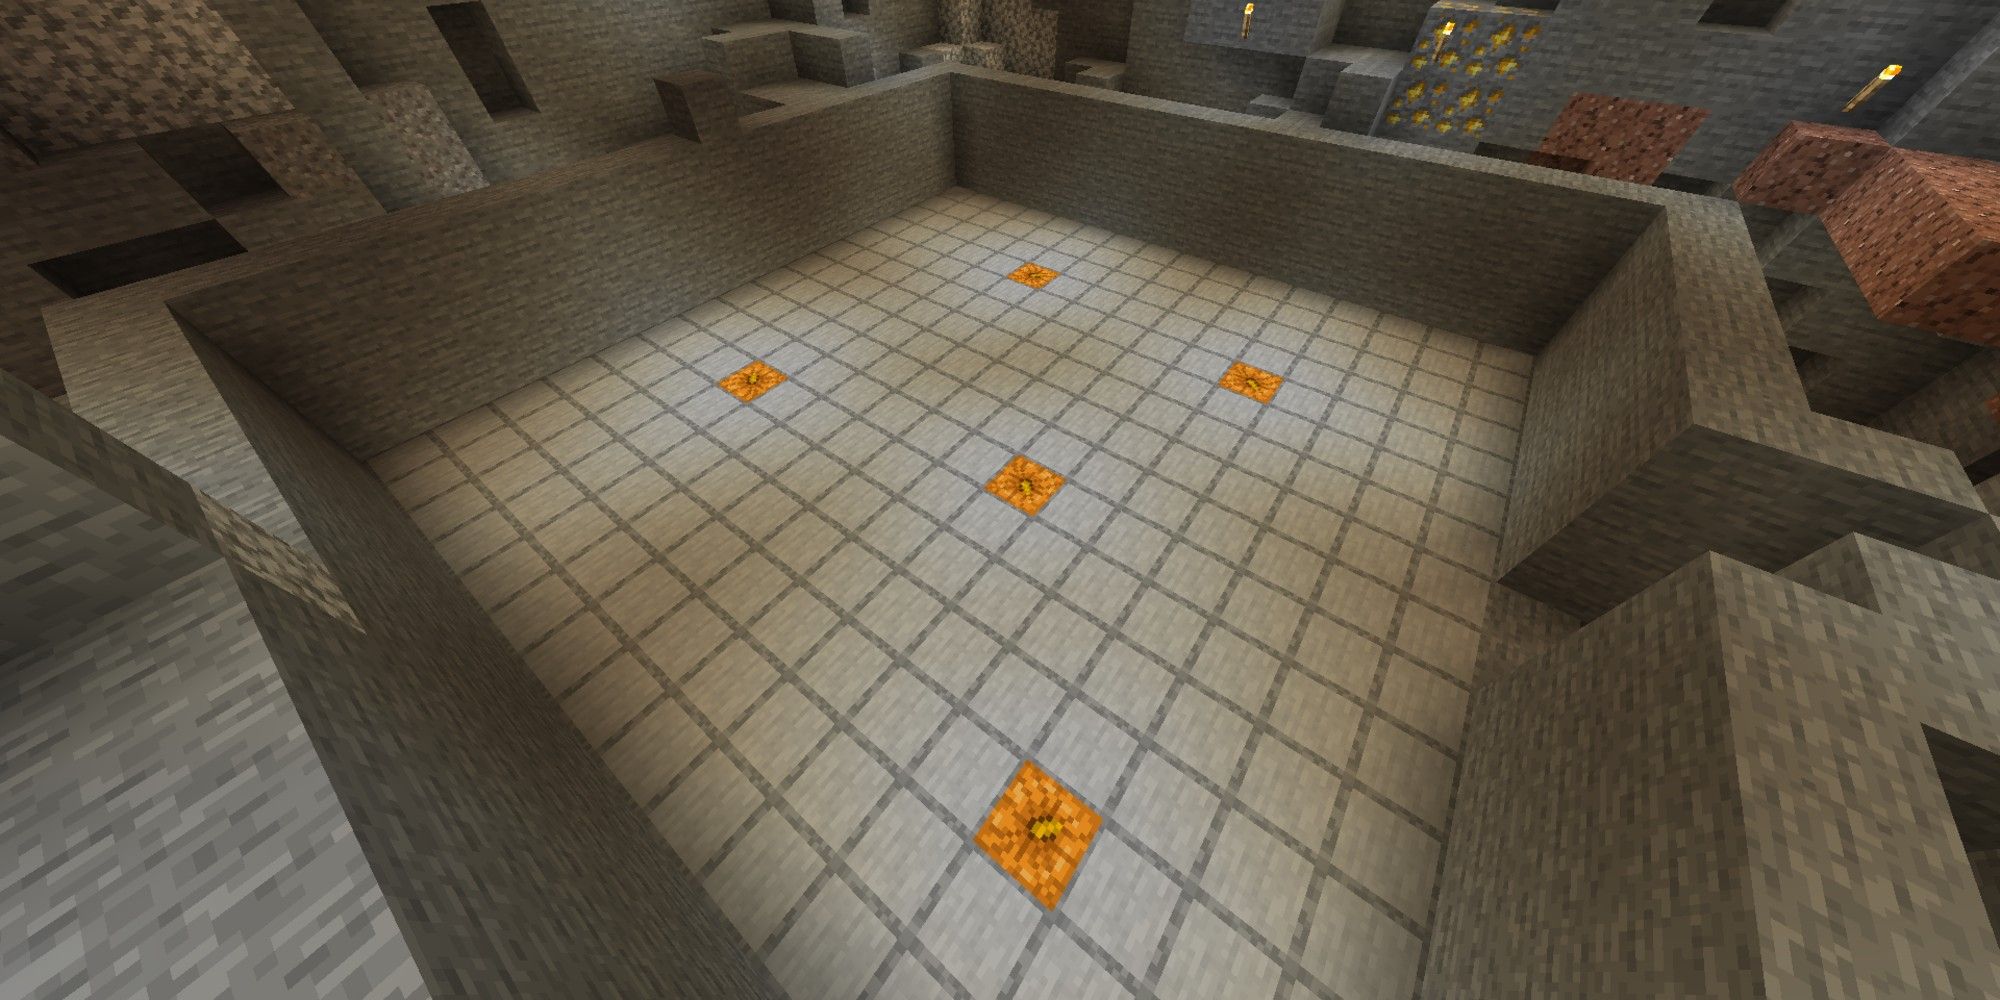 Minecraft slabs flooring complete with jack o lanterns for light source